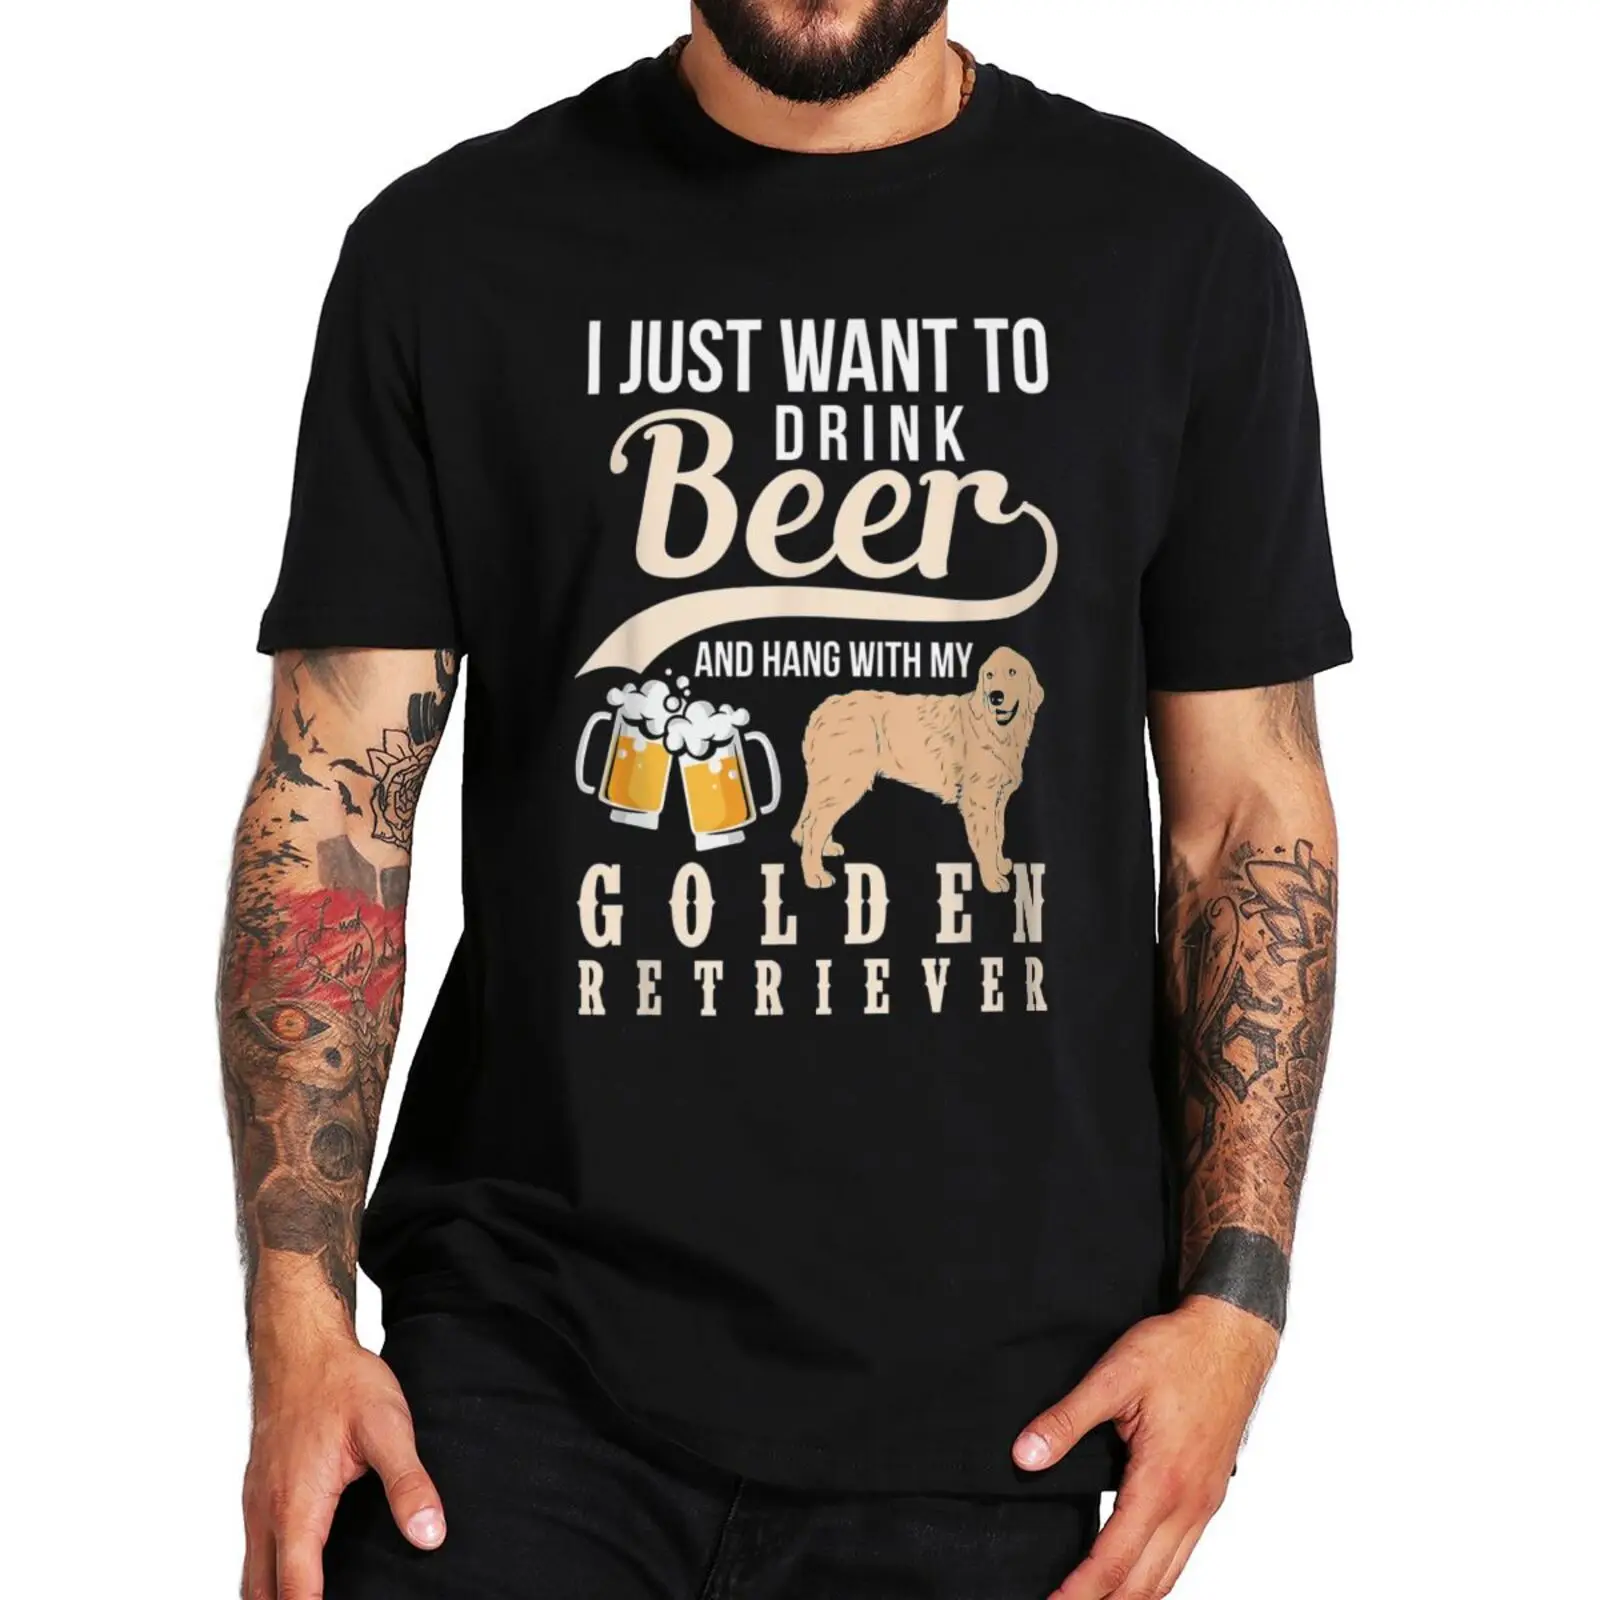 

I Just Wanna Drink Beer And Hang Out With My Golden Retriever T-shirt Funny Drinking And Dog Lovers Tee Summer Cotton EU Size